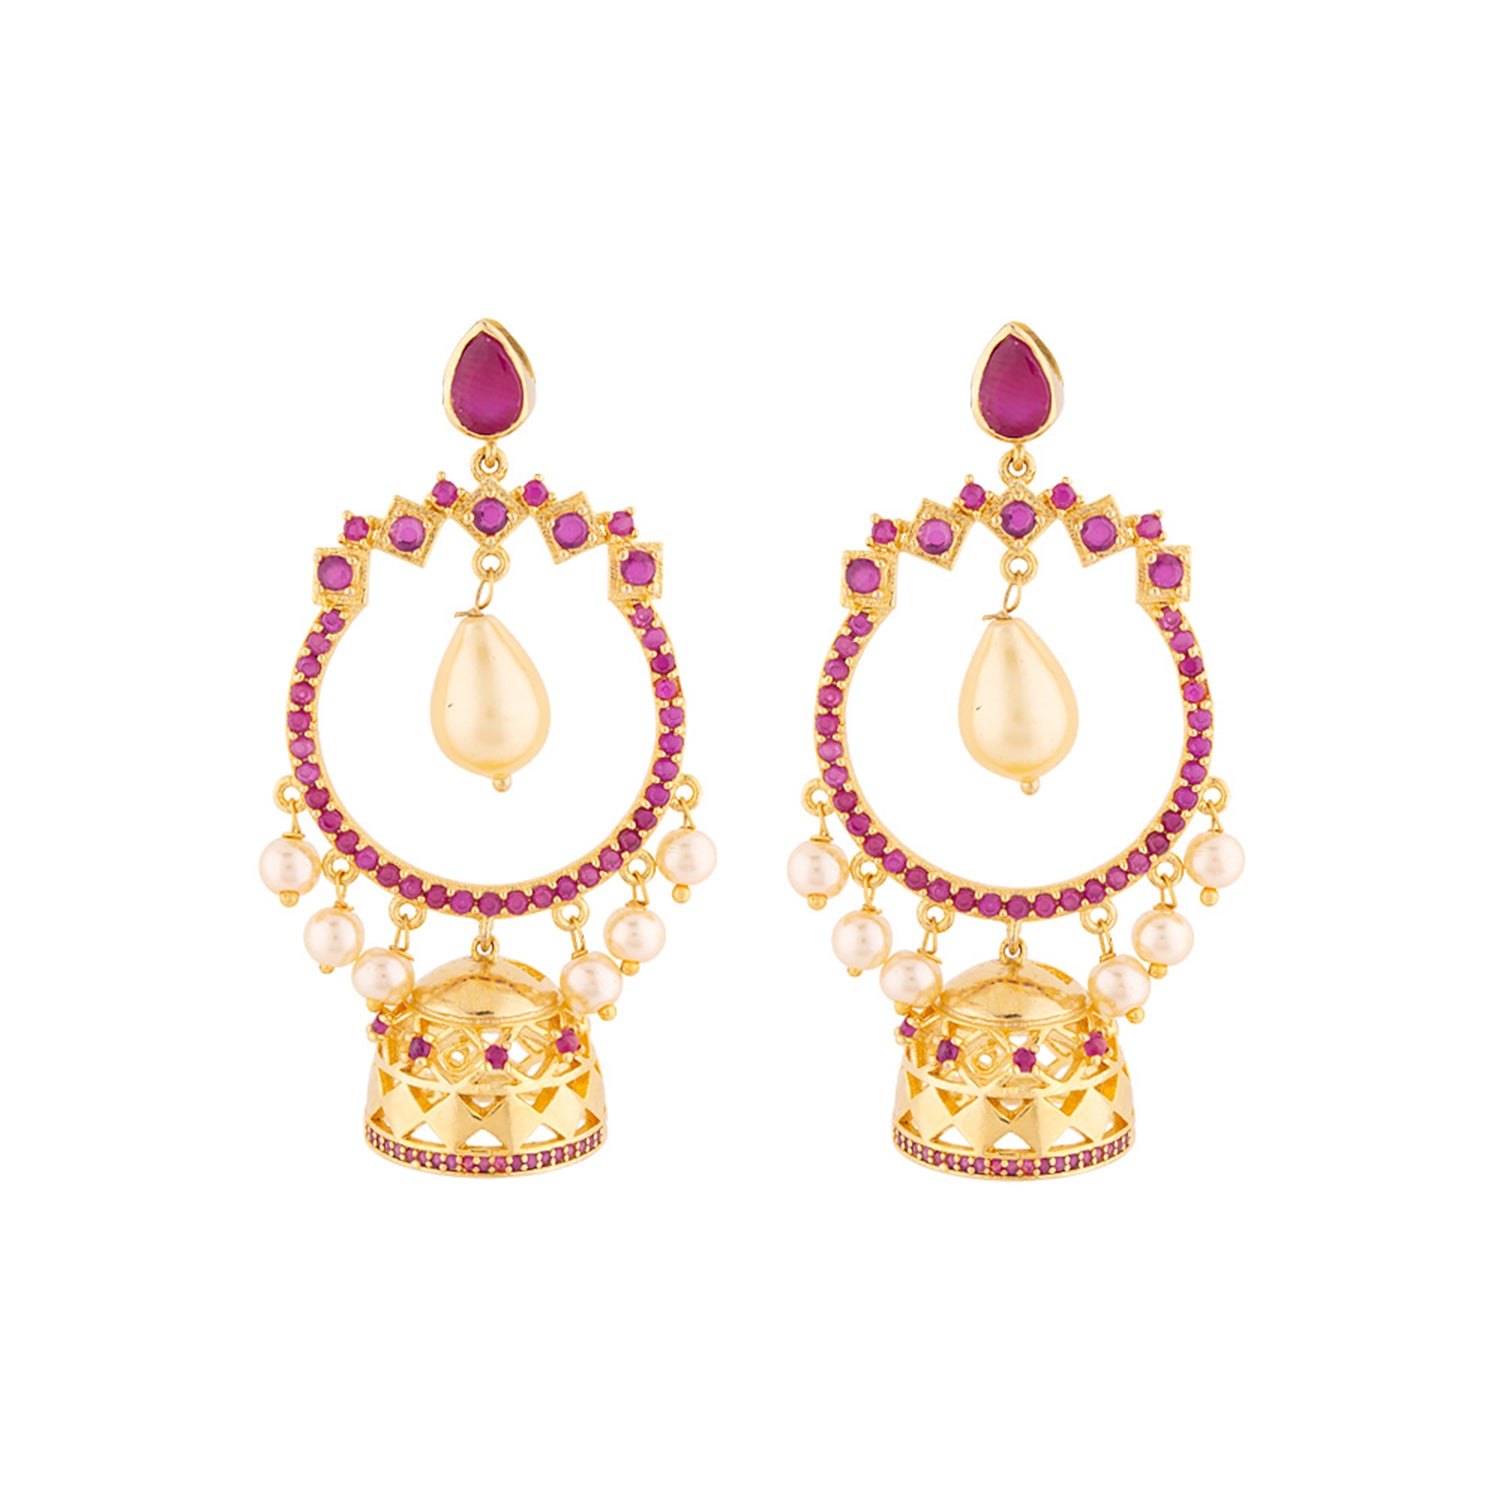 Zircon Gems and Faux Pearls Adorned Earrings